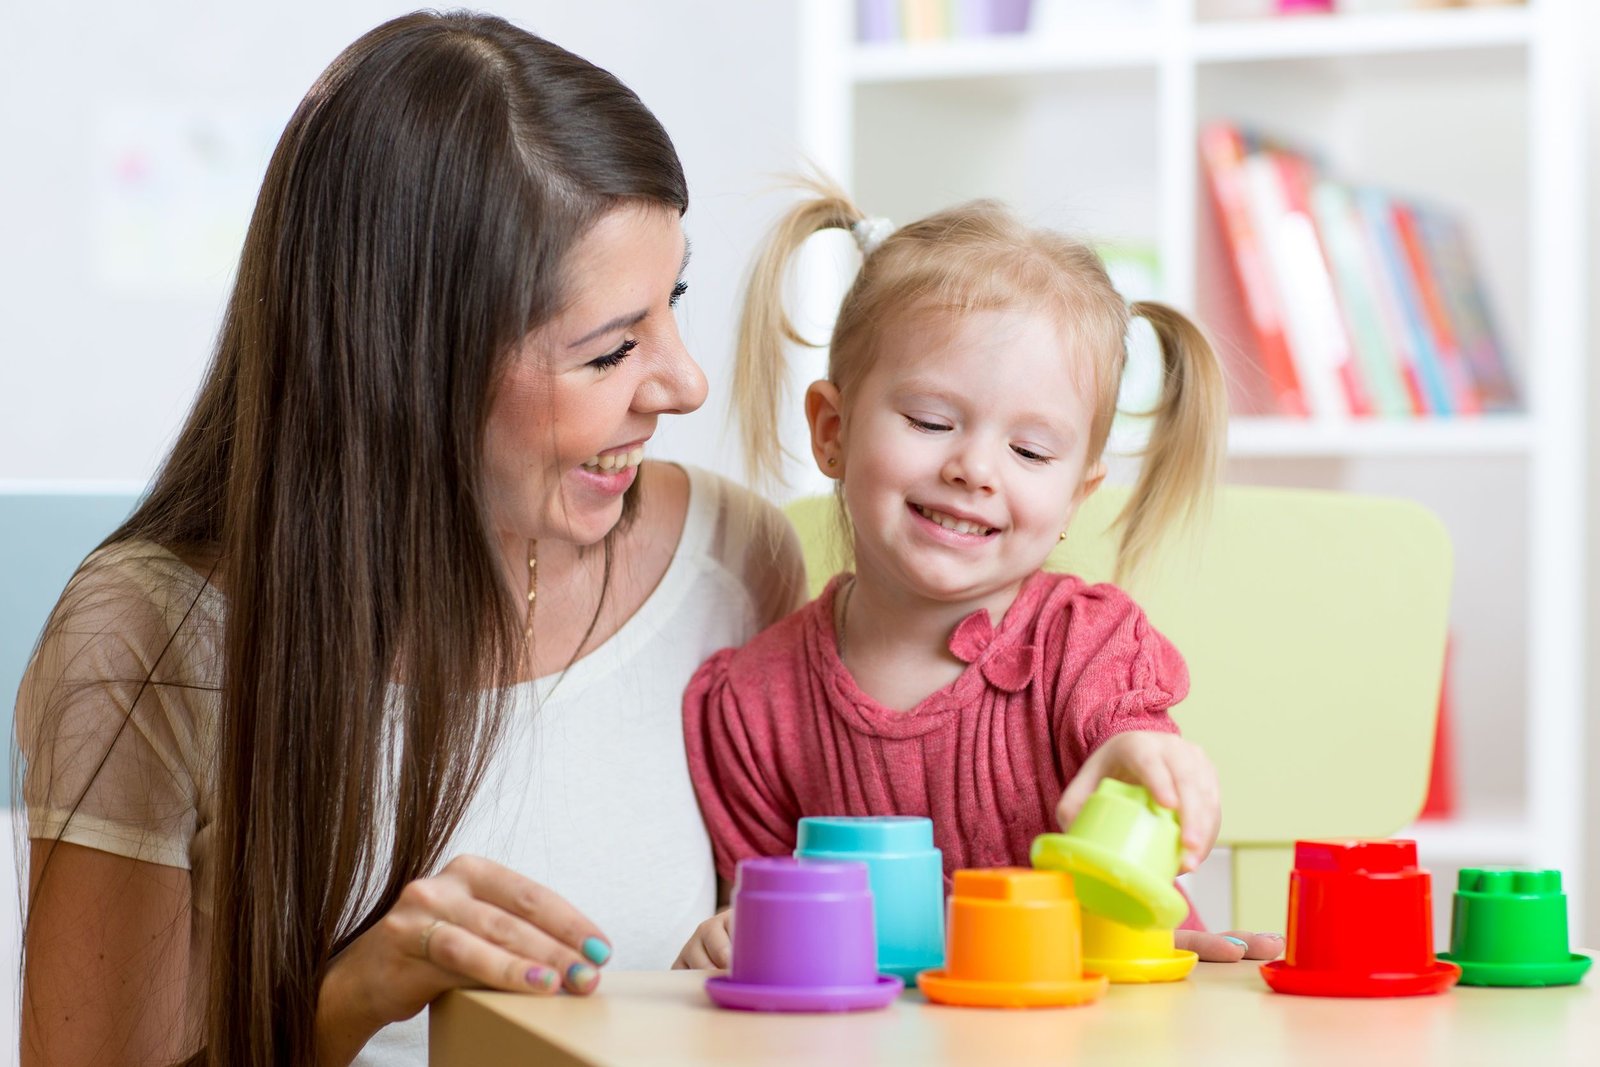 Children’s Occupational Therapy: A Complete Guide